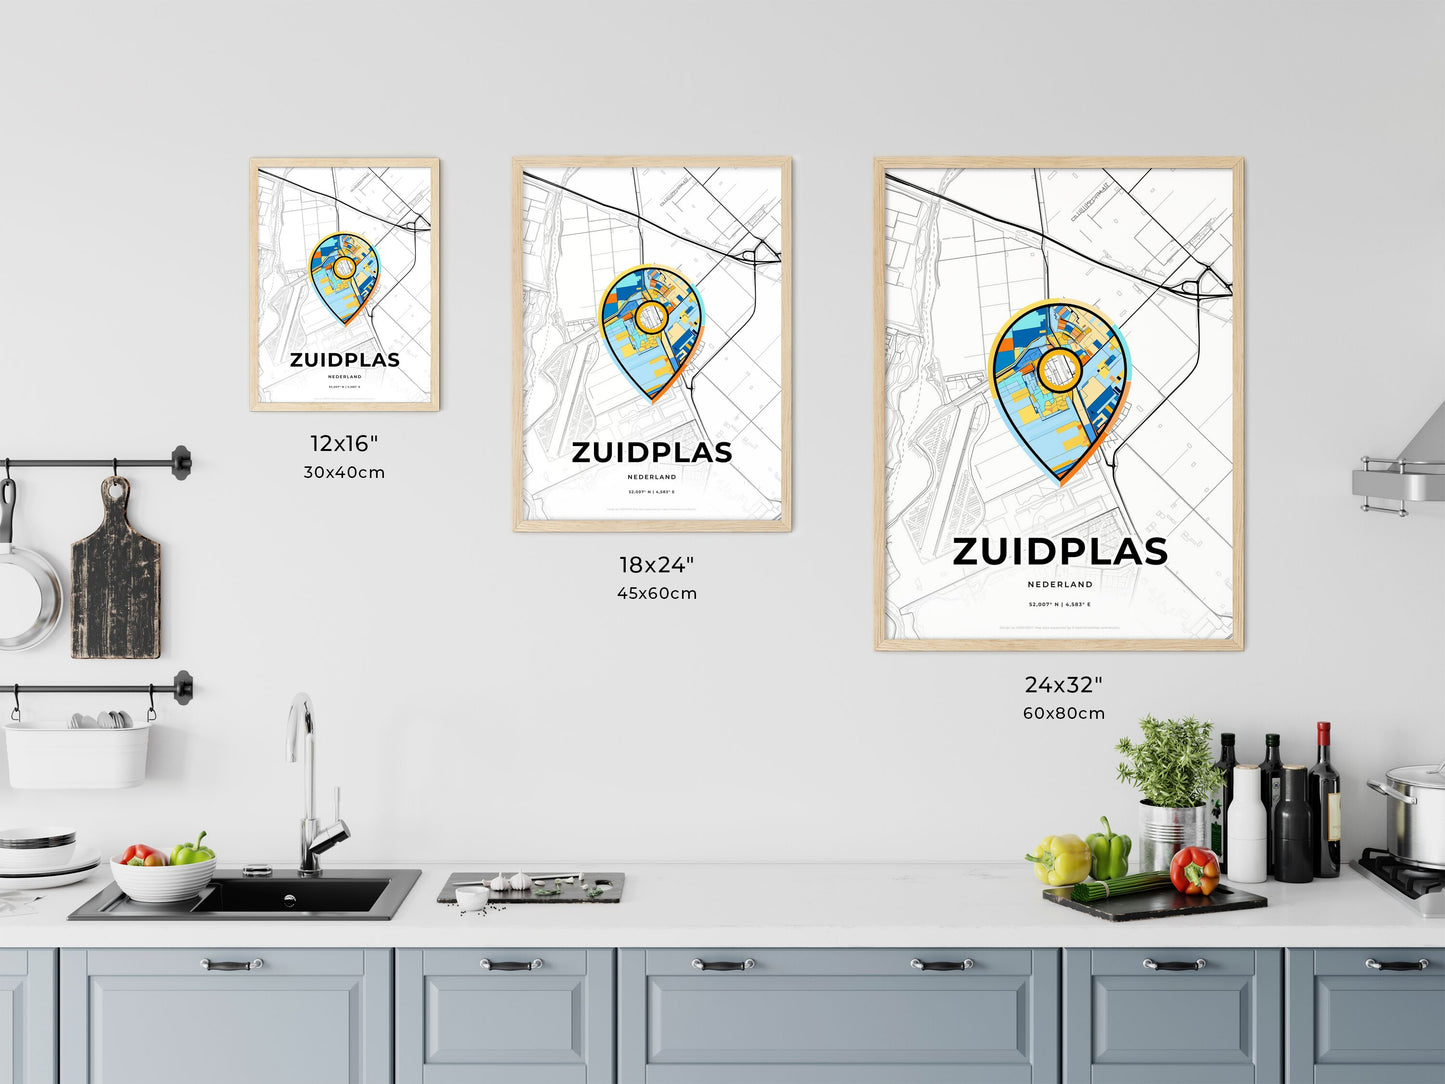 ZUIDPLAS NETHERLANDS minimal art map with a colorful icon. Where it all began, Couple map gift.